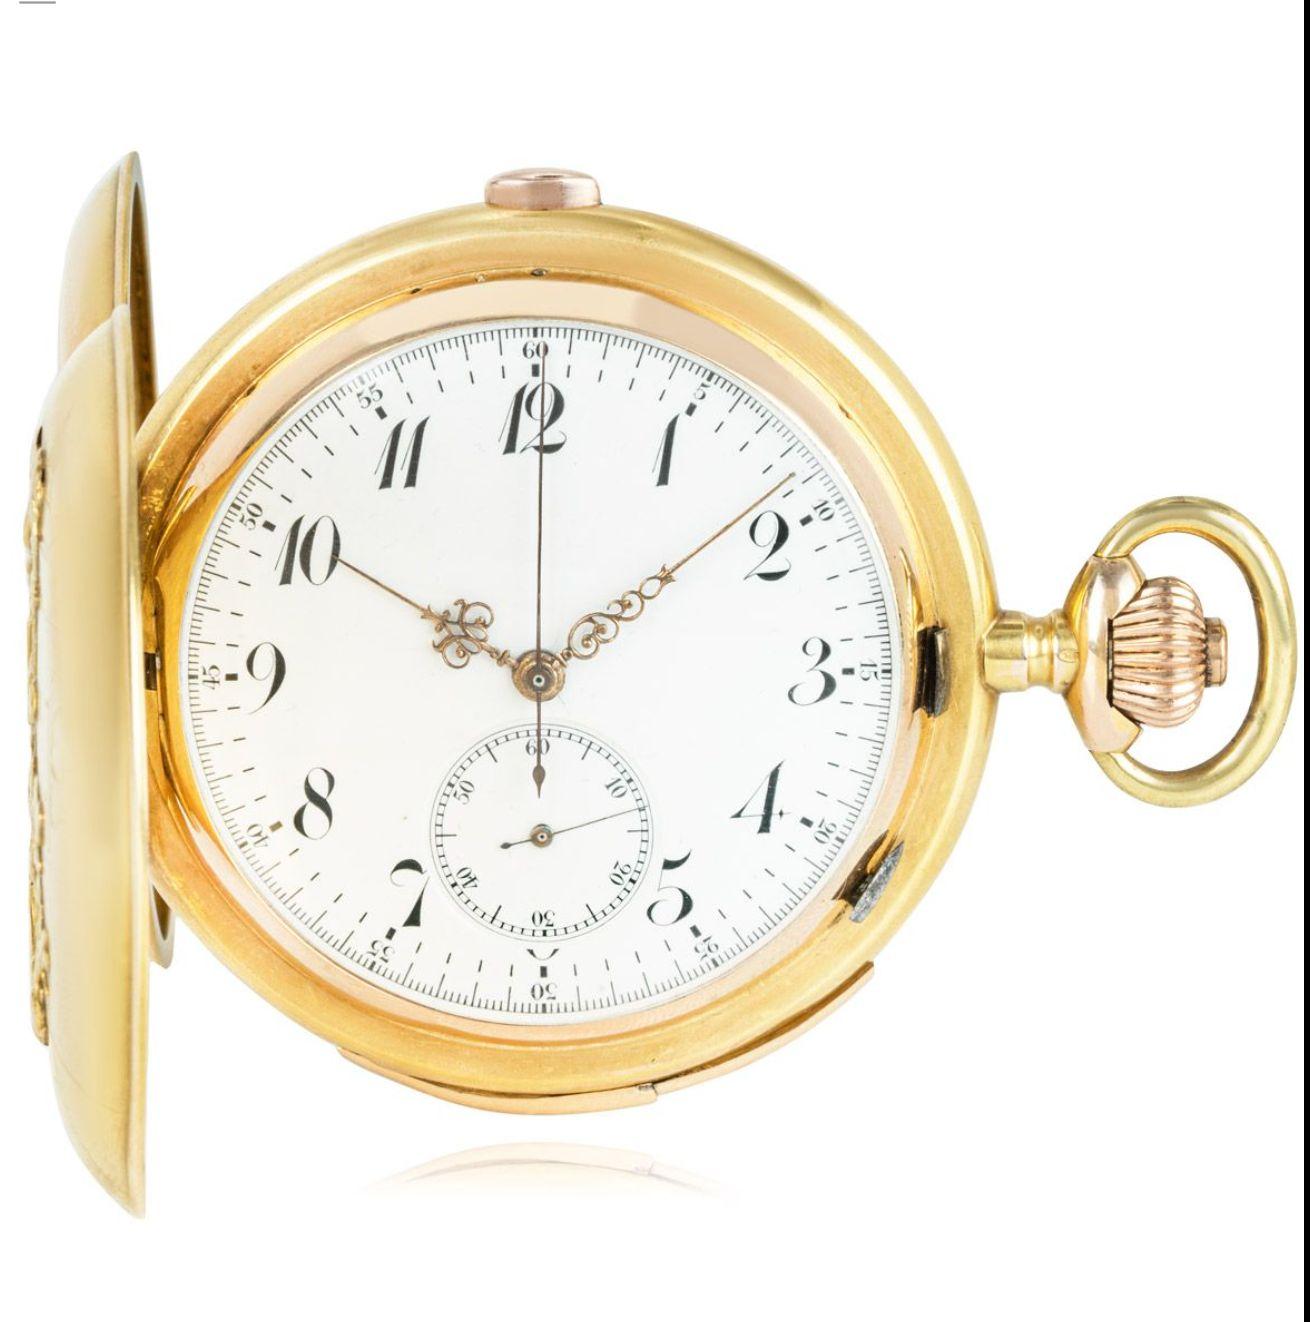 A large 18ct gold Keyless Lever Minute Repeater Chronograph Full Hunter Pocket Watch C1890 .

Dial: the excellent white enamel dial with Arabic numerals and outer minute track with five second intervals, subsidiary seconds dial at six o'clock with